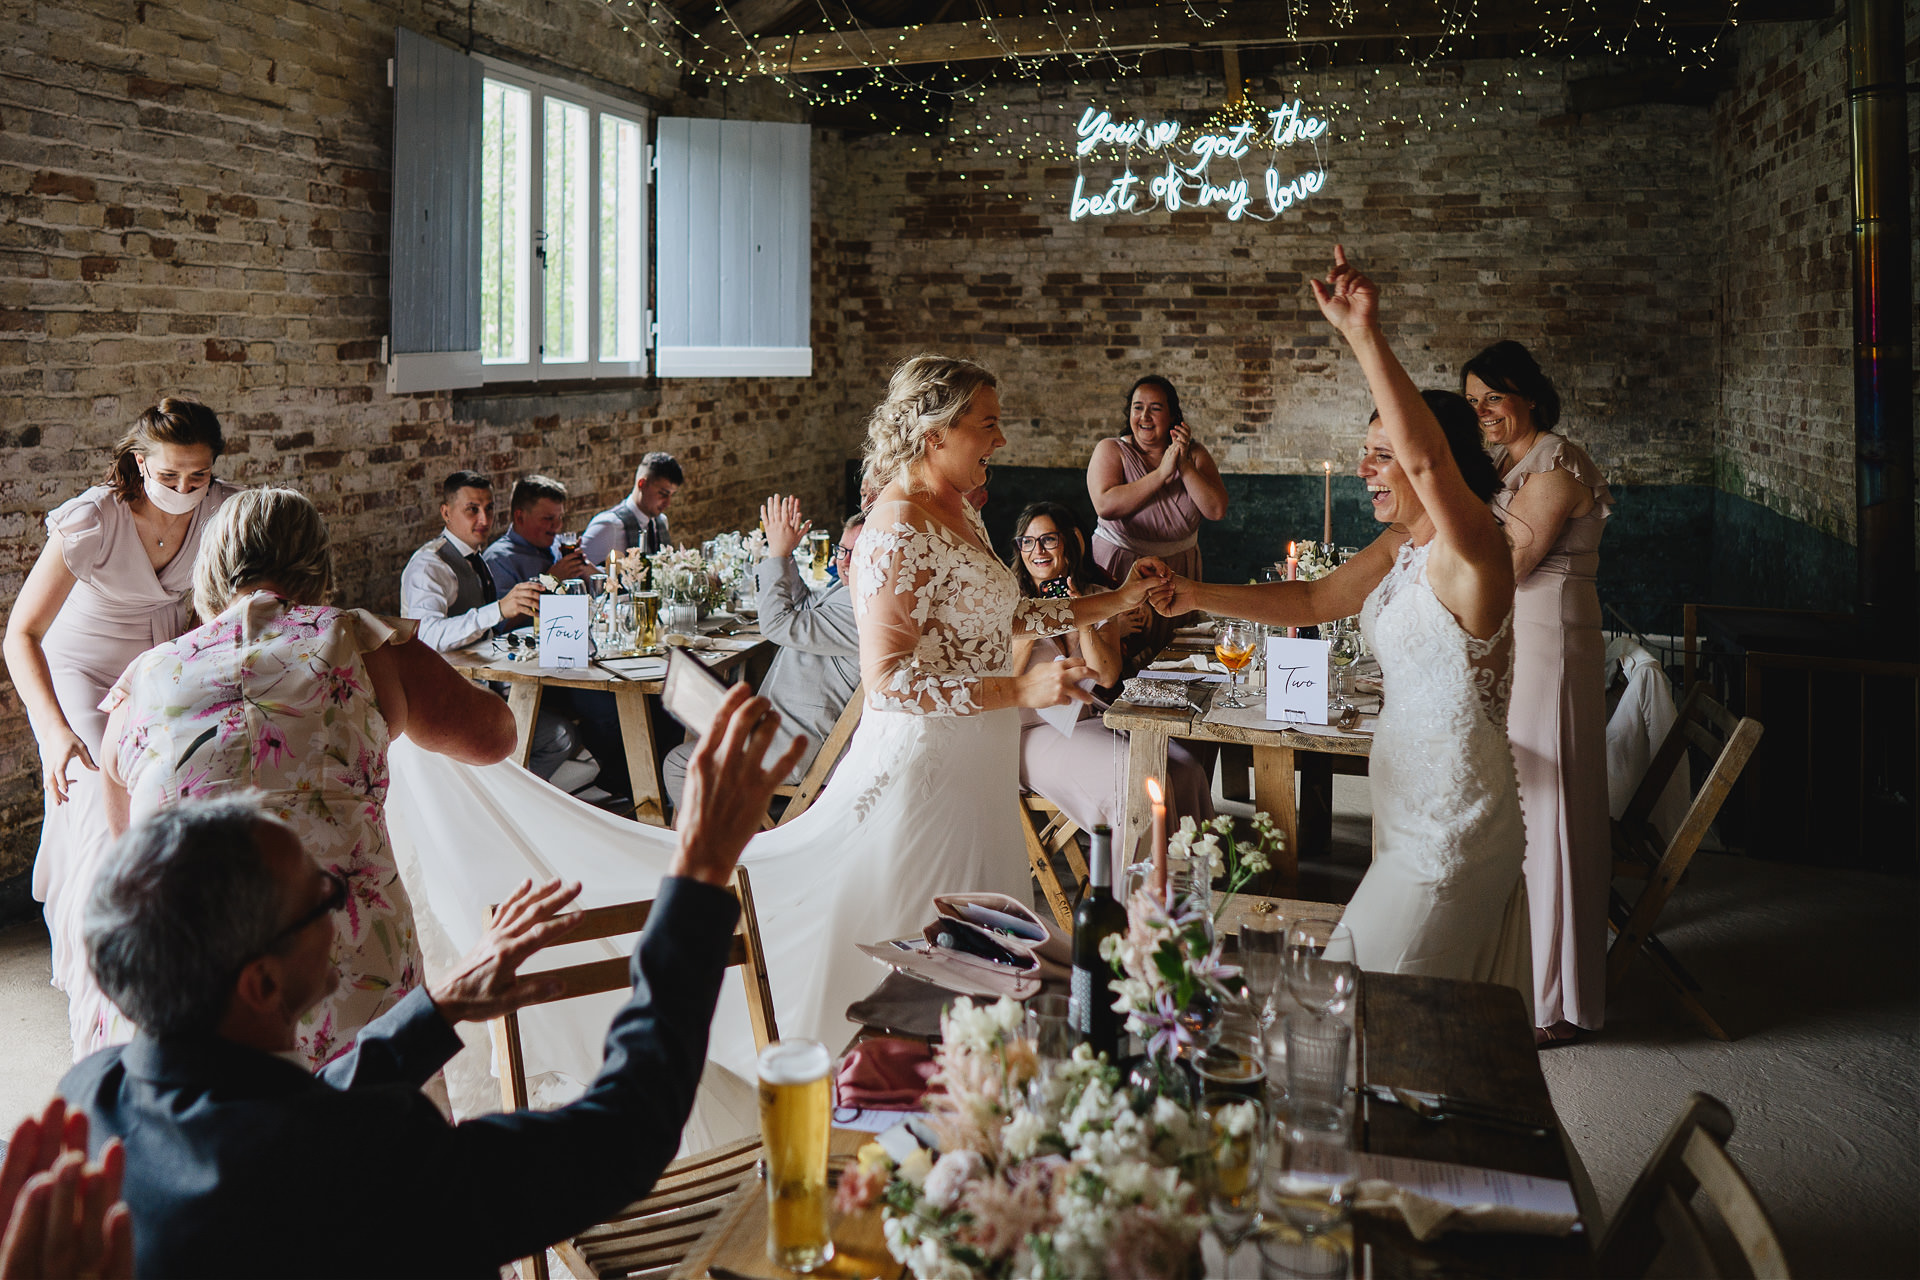 Two brides entering their wedding breakfast with guests cheering and clapping in a rustic barn